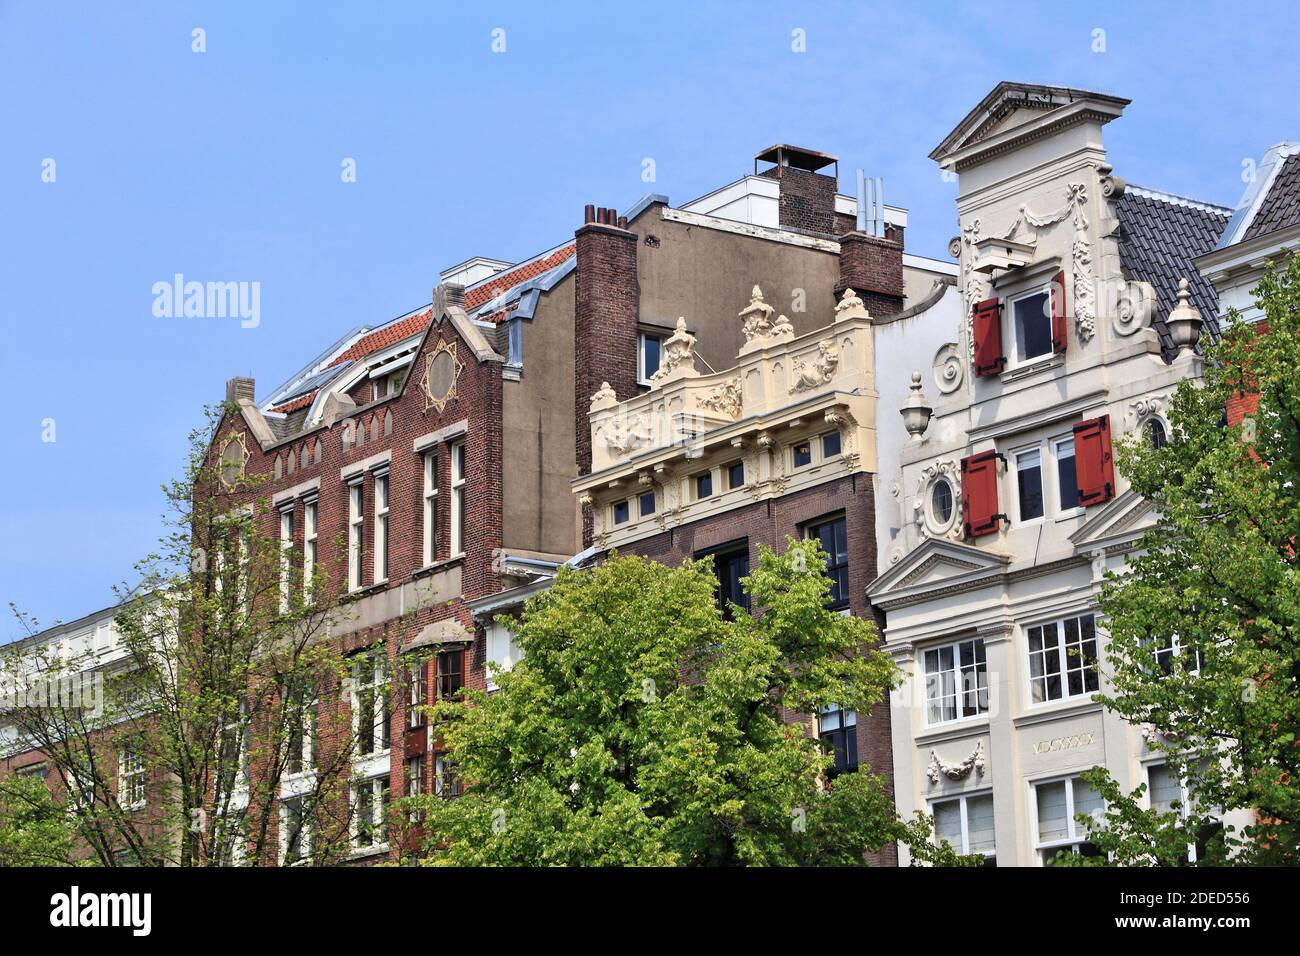 Amsterdam old city architecture - Keizersgracht residential buildings. Netherlands rowhouse. Stock Photo